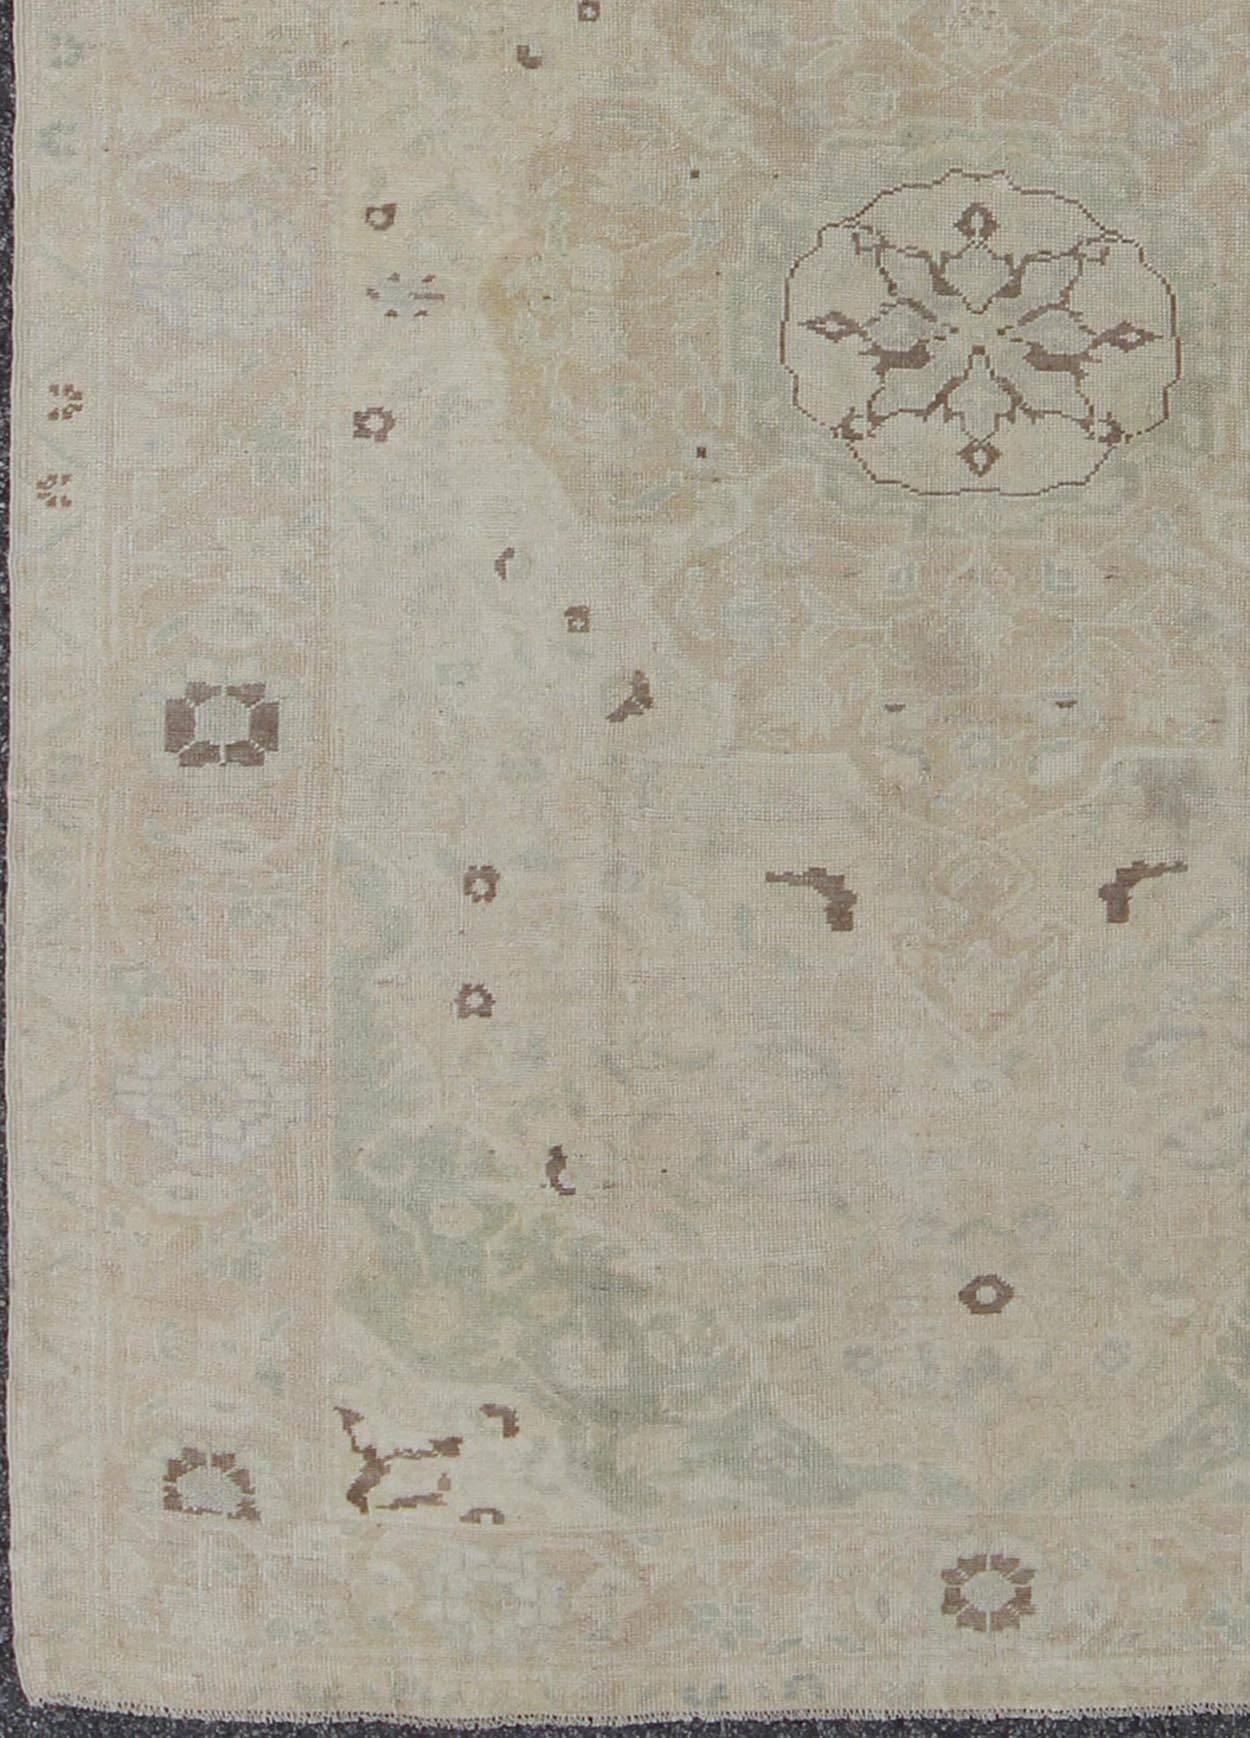 Muted Turkish Oushak rug with medallion design and floral pattern.  rug en-141693, country of origin / type: Turkey / Oushak, circa mid-20th century

This Turkish Oushak carpet (circa mid-20th century) features a central medallion design, as well as